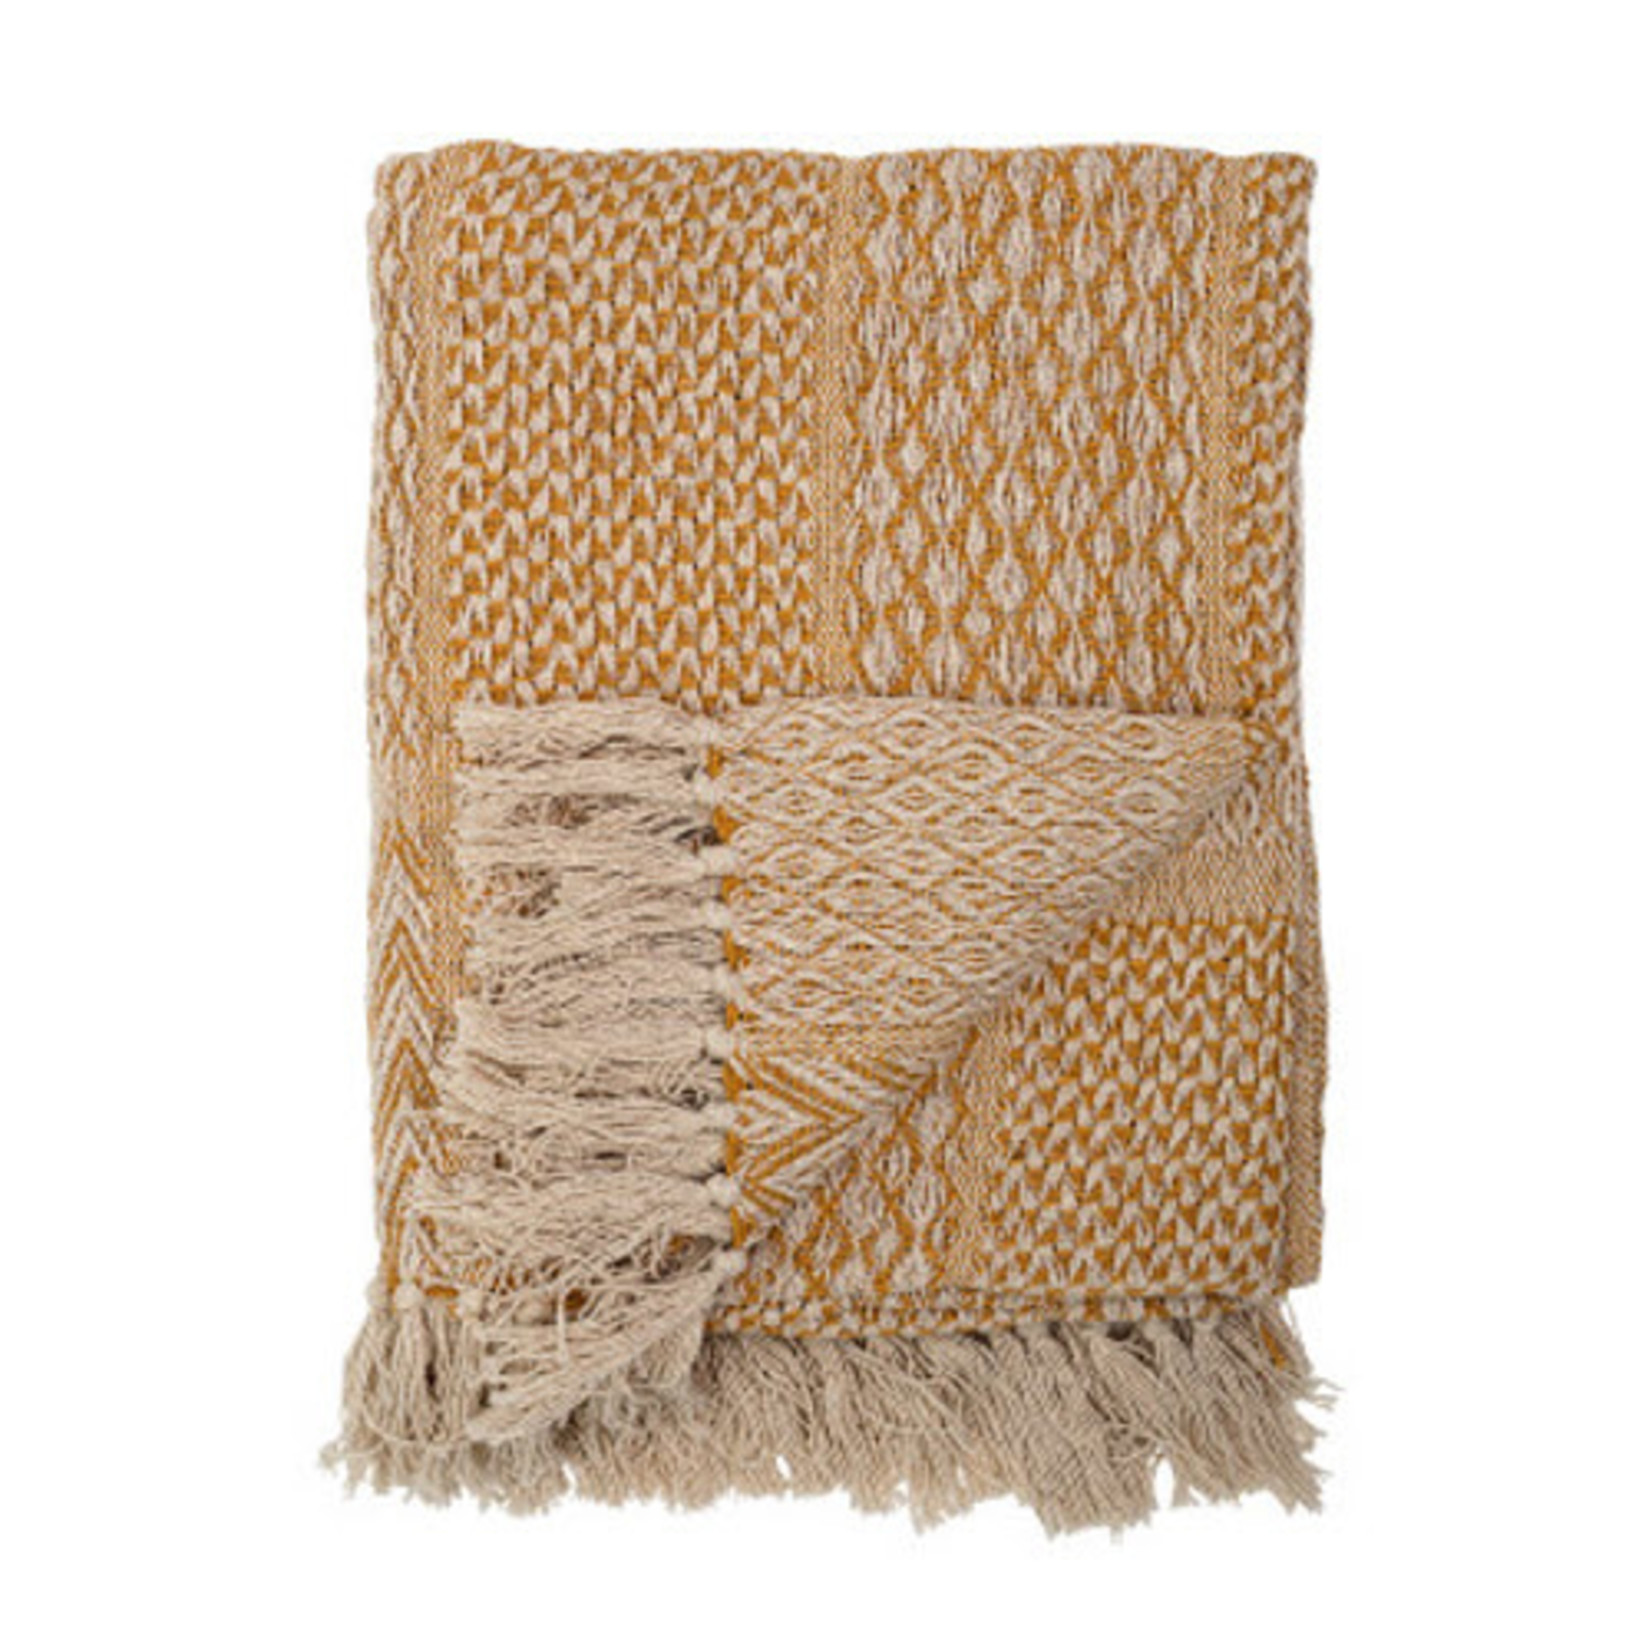 Woven Recycled Cotton Blend Throw with Tassles